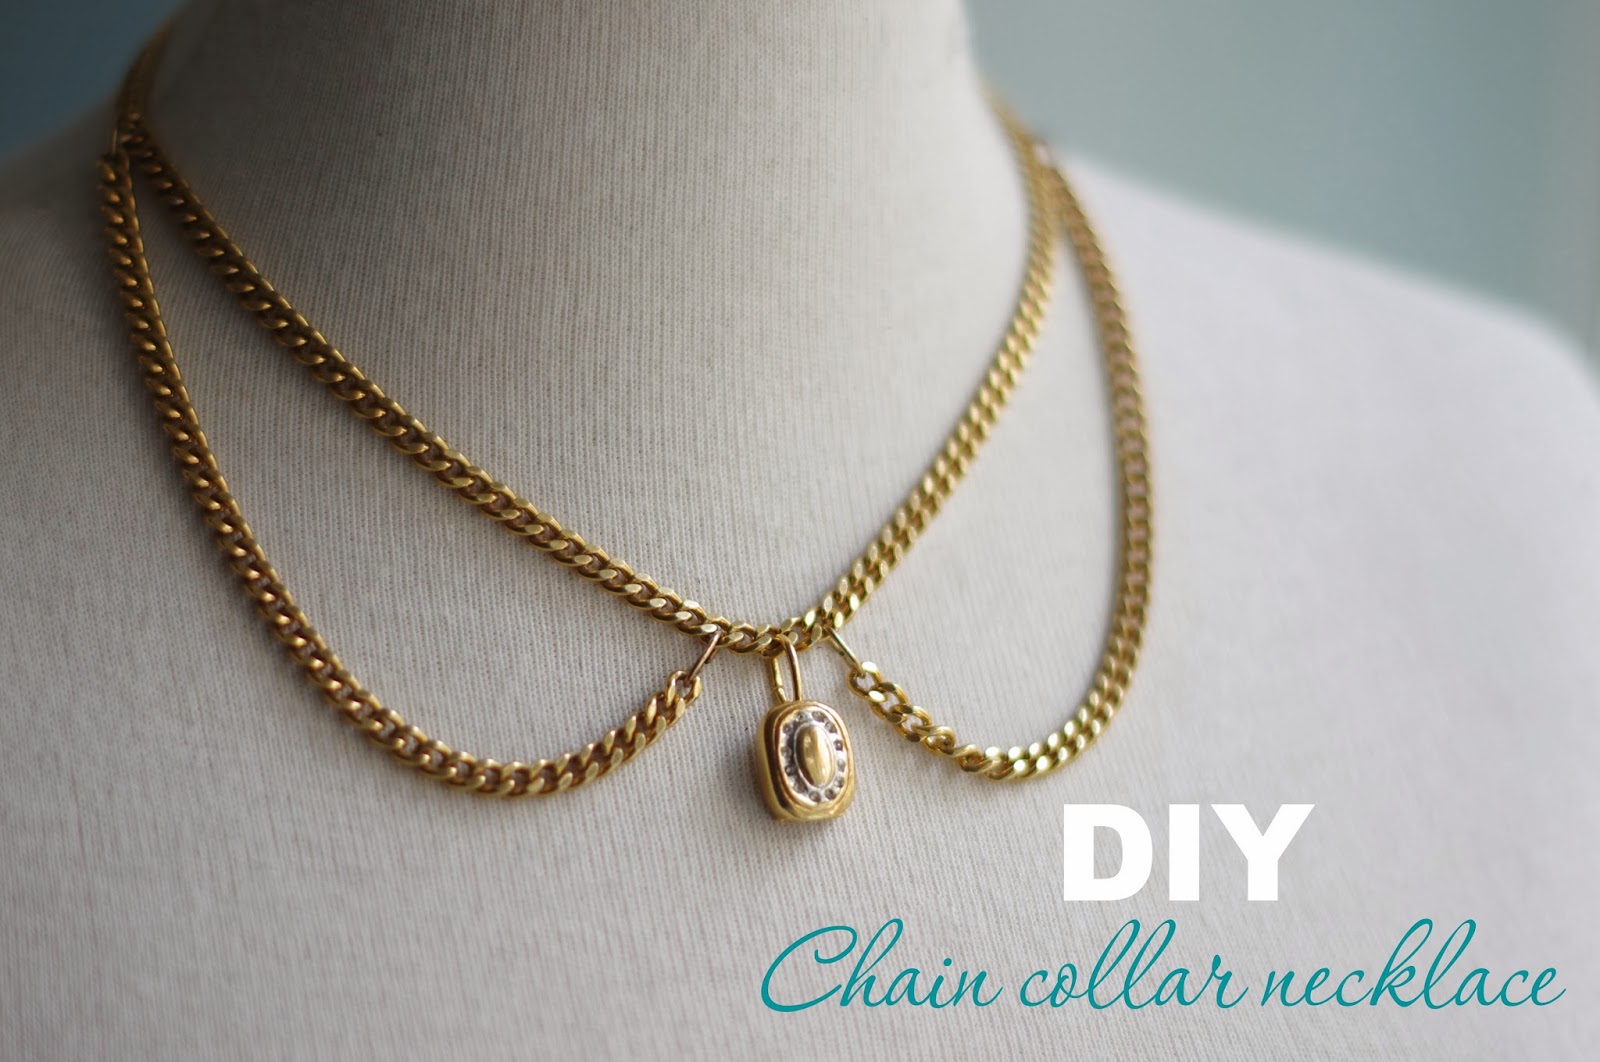 How to Make Popular Gold Beaded Chain Body Jewelry | Body chain jewelry,  Handmade jewelry designs, Diy body chain